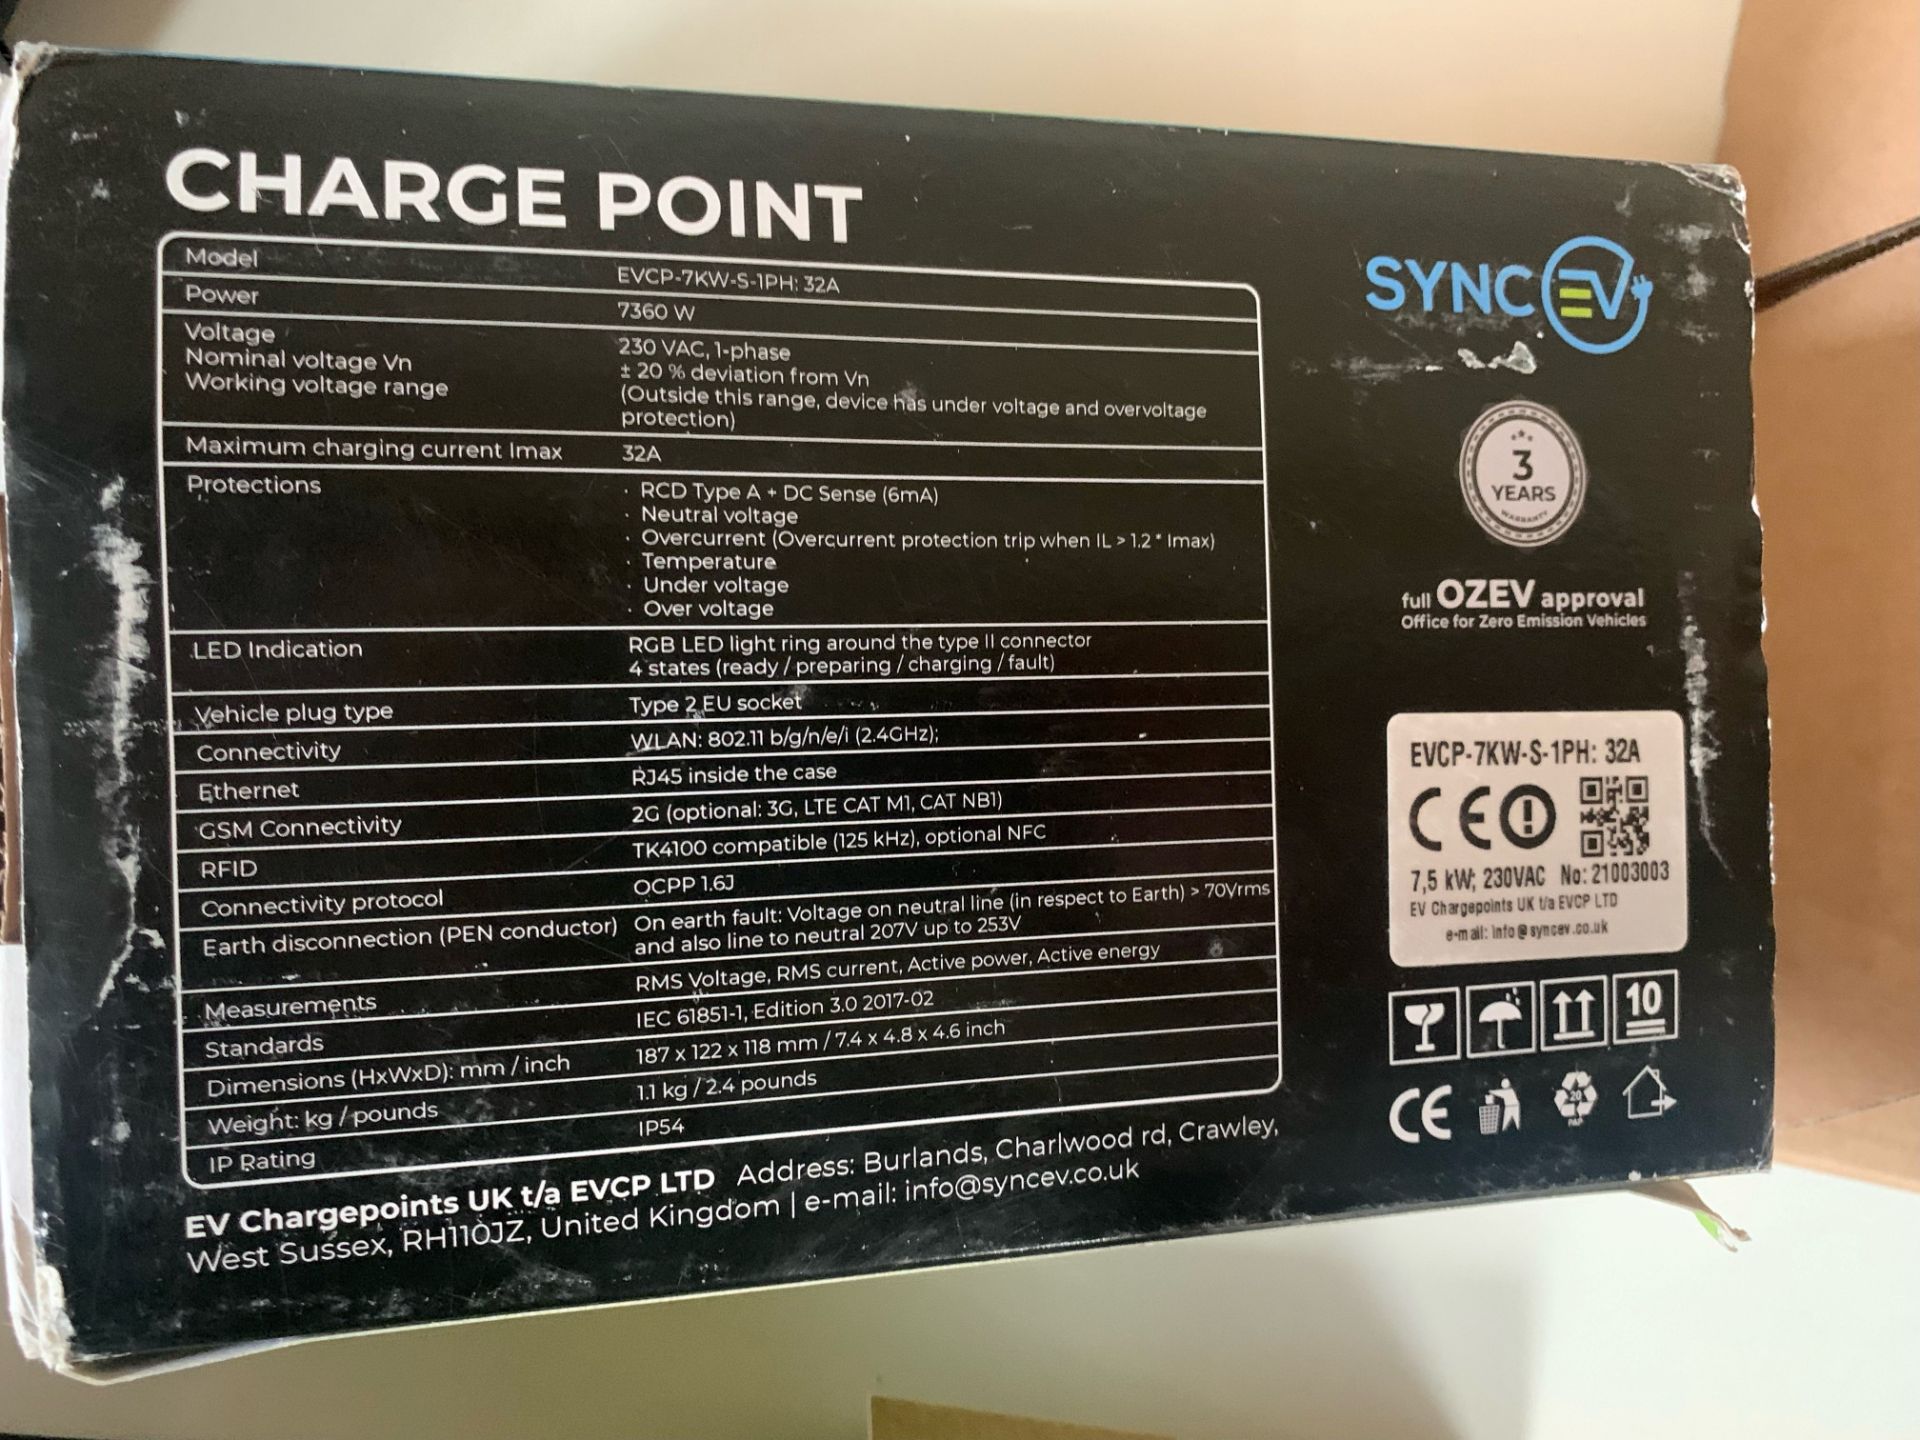 Wall Box Plus Electric Vehicle Charging Socket & Sync EVCP-7KW-S-1PH Electric Vehicle Charger ( - Image 6 of 7